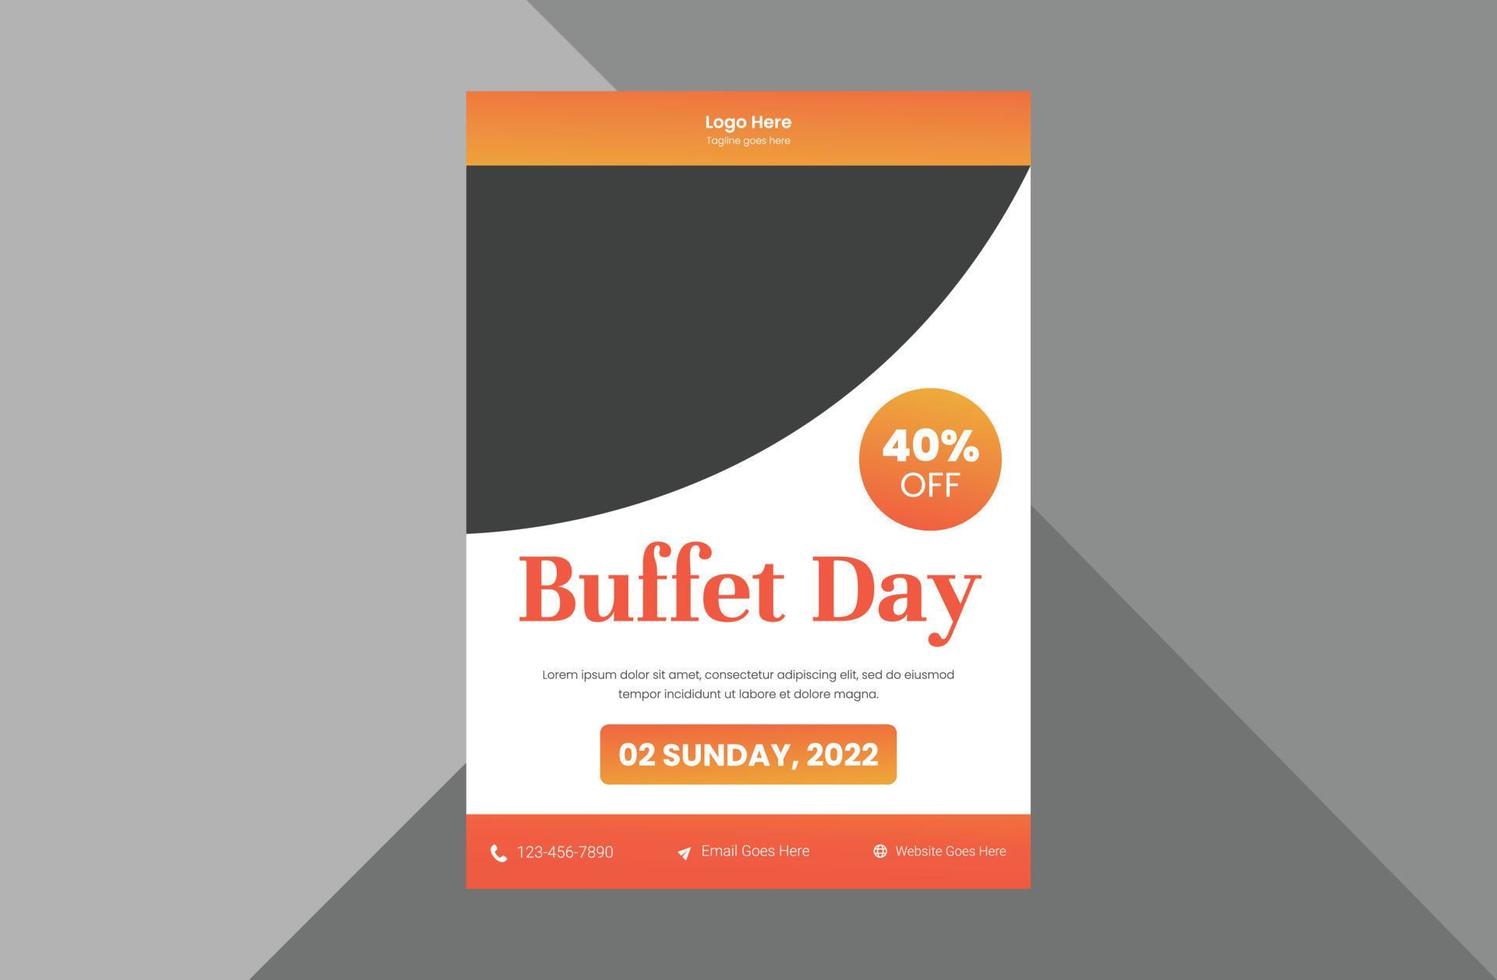 national buffet day flyer template, poster. buffet fest promotion flyer design. cover, poster, flyer, print-ready vector